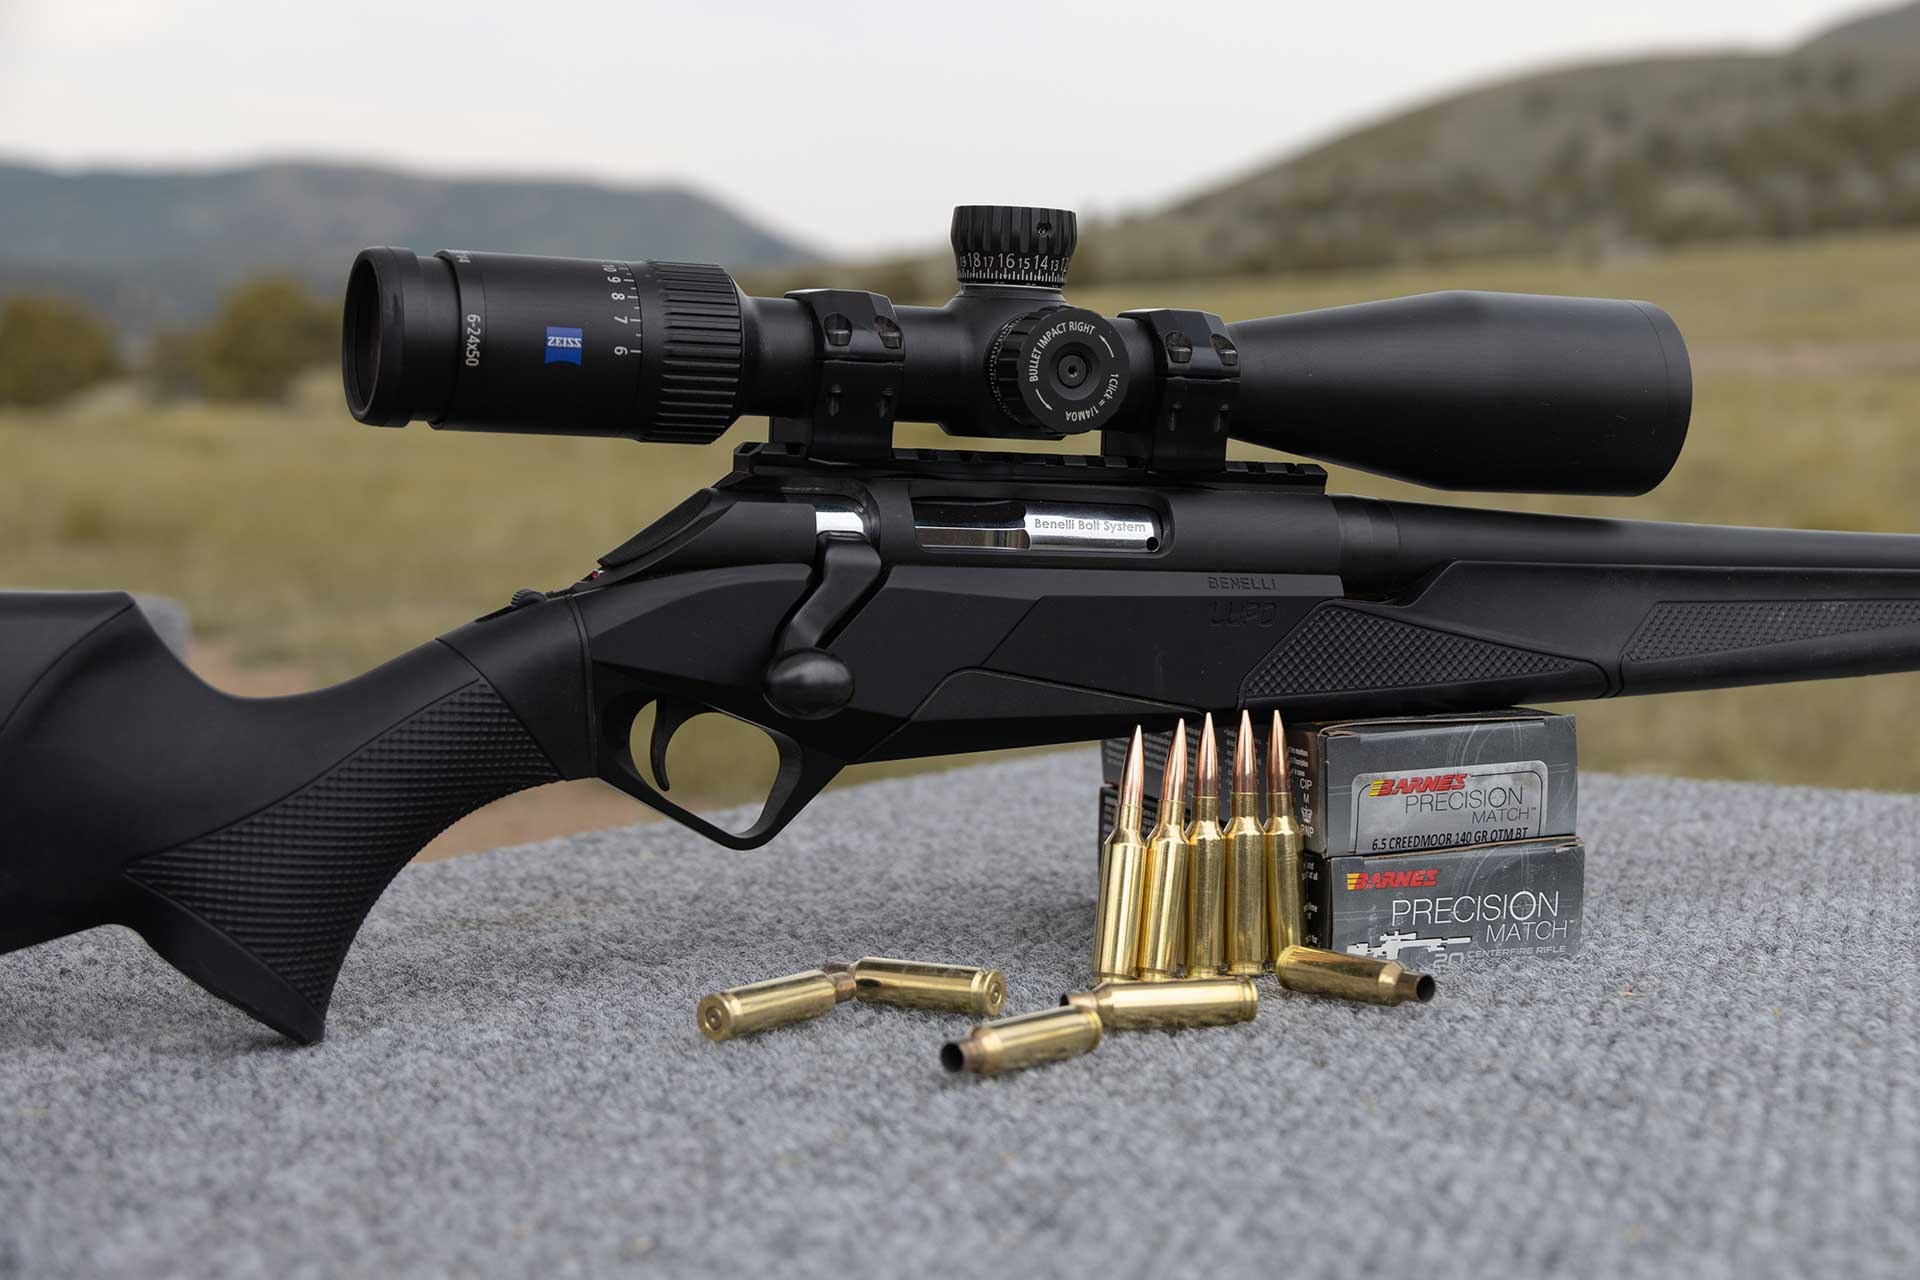 A Benelli Lupo rifle sitting on a shooting bench next to Barnes Precision ammunition.